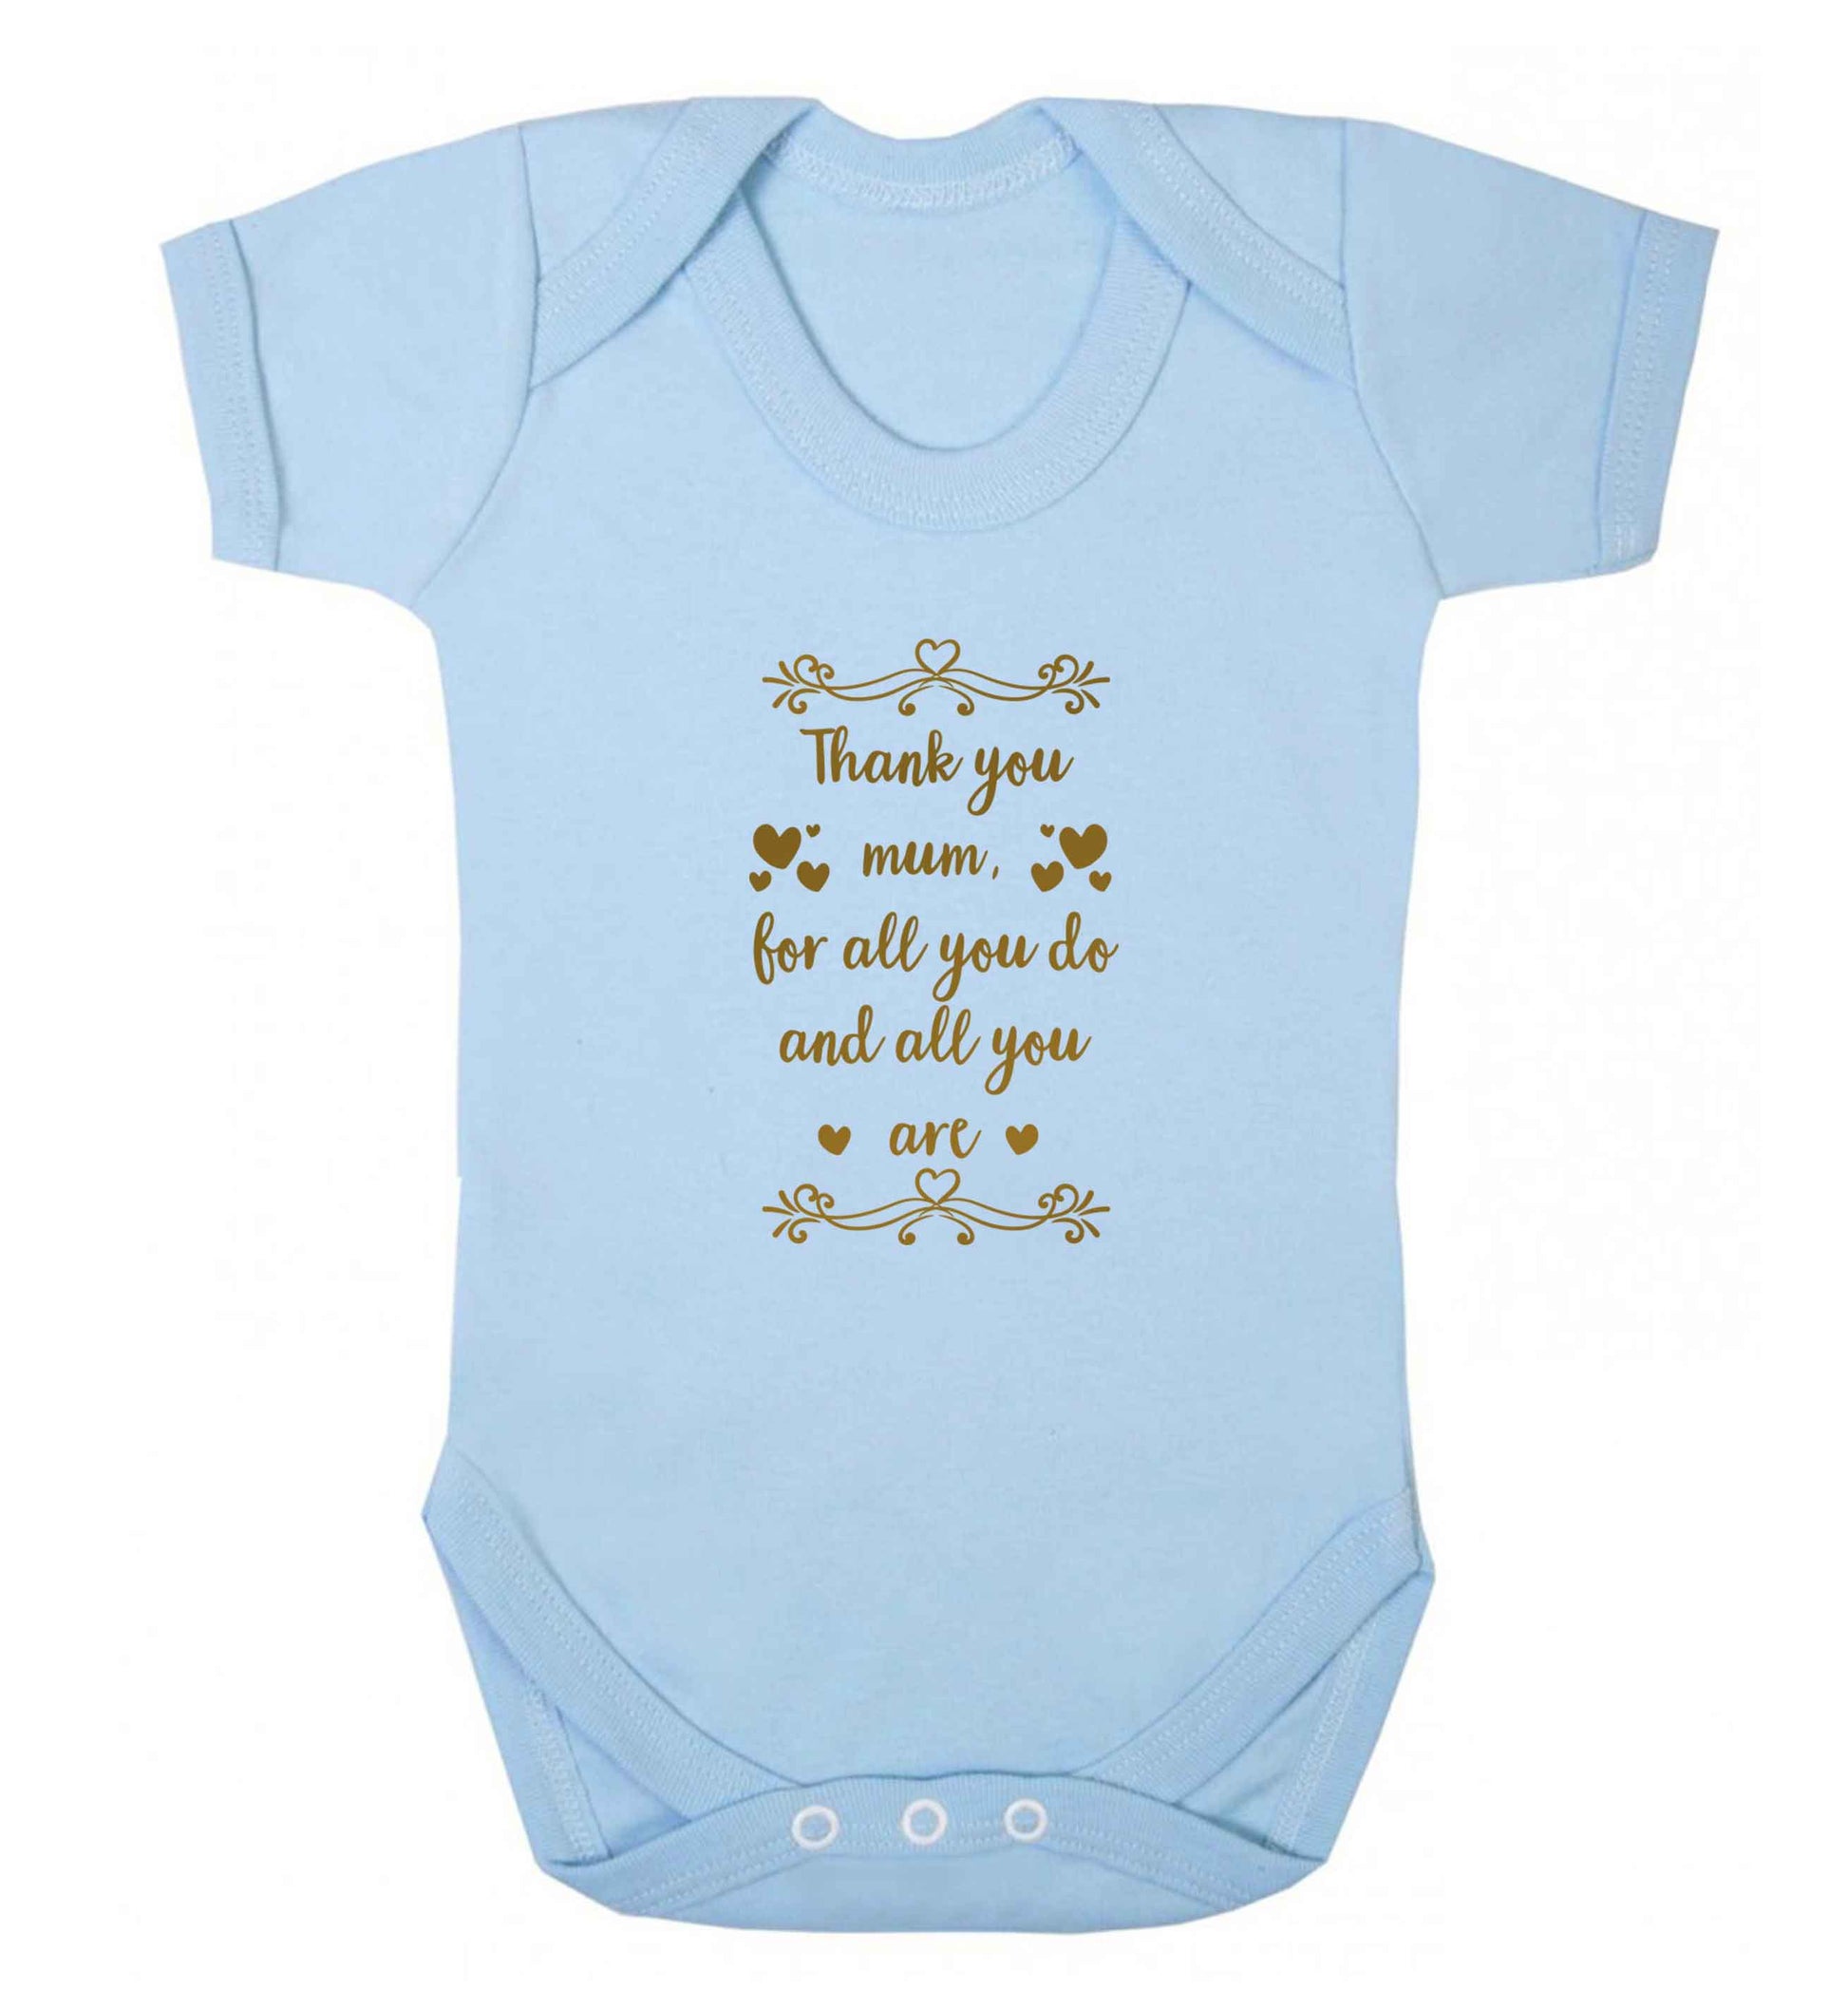 Gorgeous gifts for mums on mother's day! Thank you mum for all you do and all you are baby vest pale blue 18-24 months